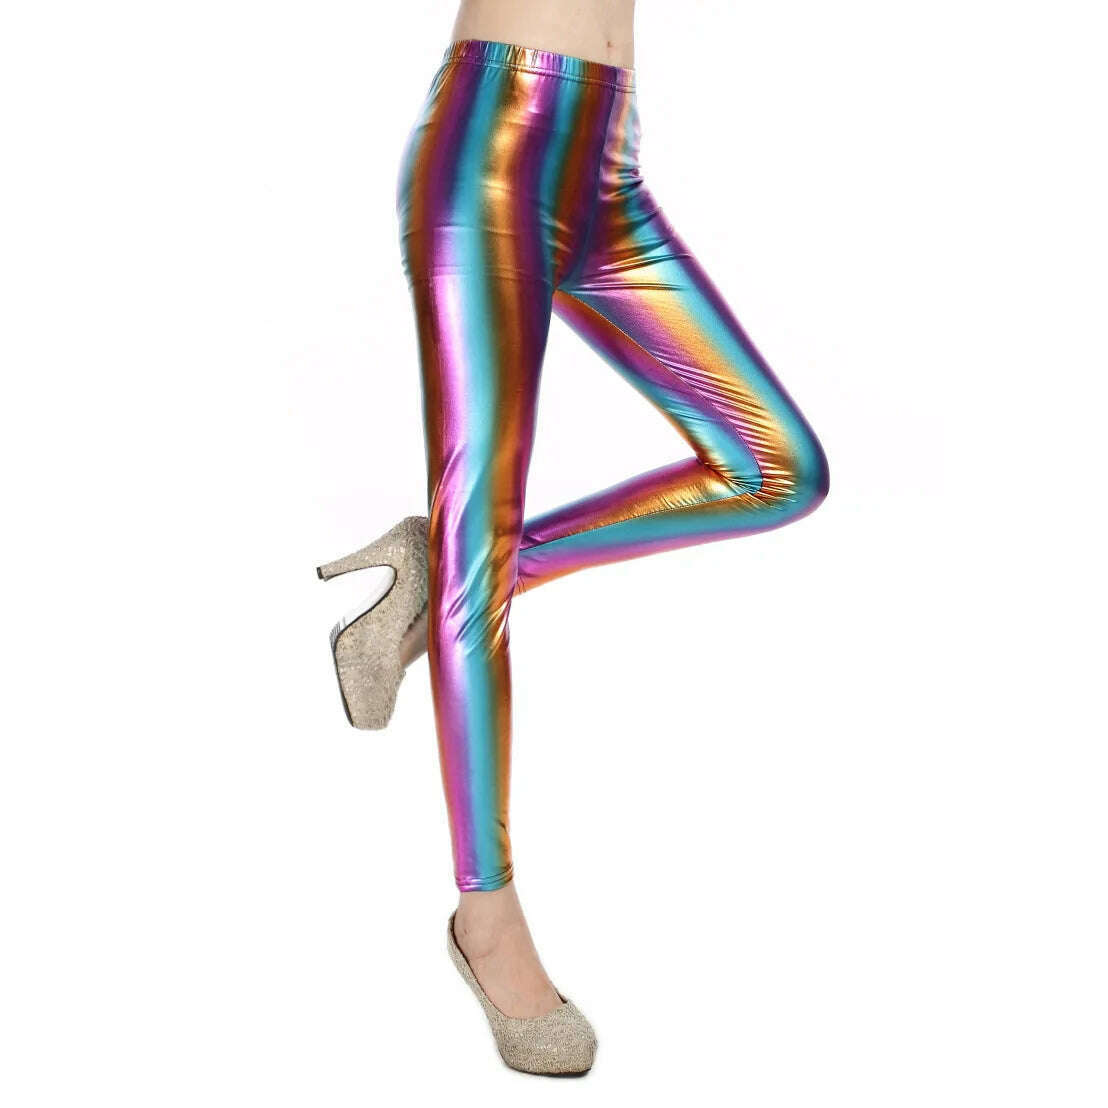 KIMLUD, Metallic Color PU Leggings Women Faux Leather Pants Dancing Party Pant Sexy Night Club Skinny Costume Pants Tight Trousers, Rainbow / One size 50kg below, KIMLUD Women's Clothes